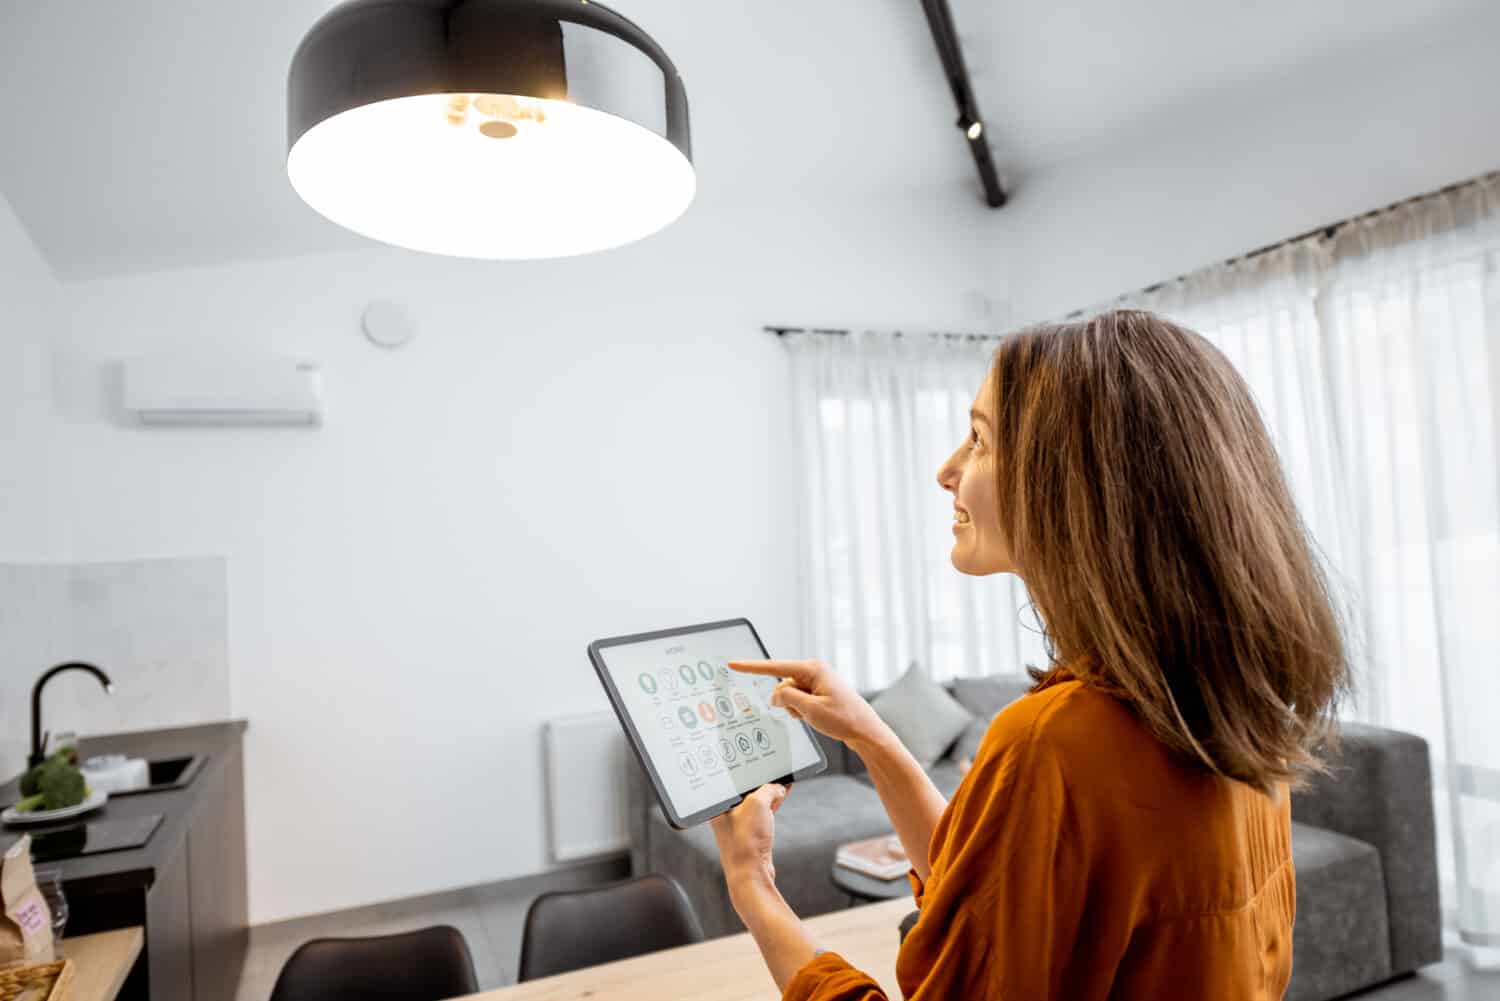 Young woman controlling home smart light with a digital tablet in the living room. Concept of a smart home and light control with mobile devices